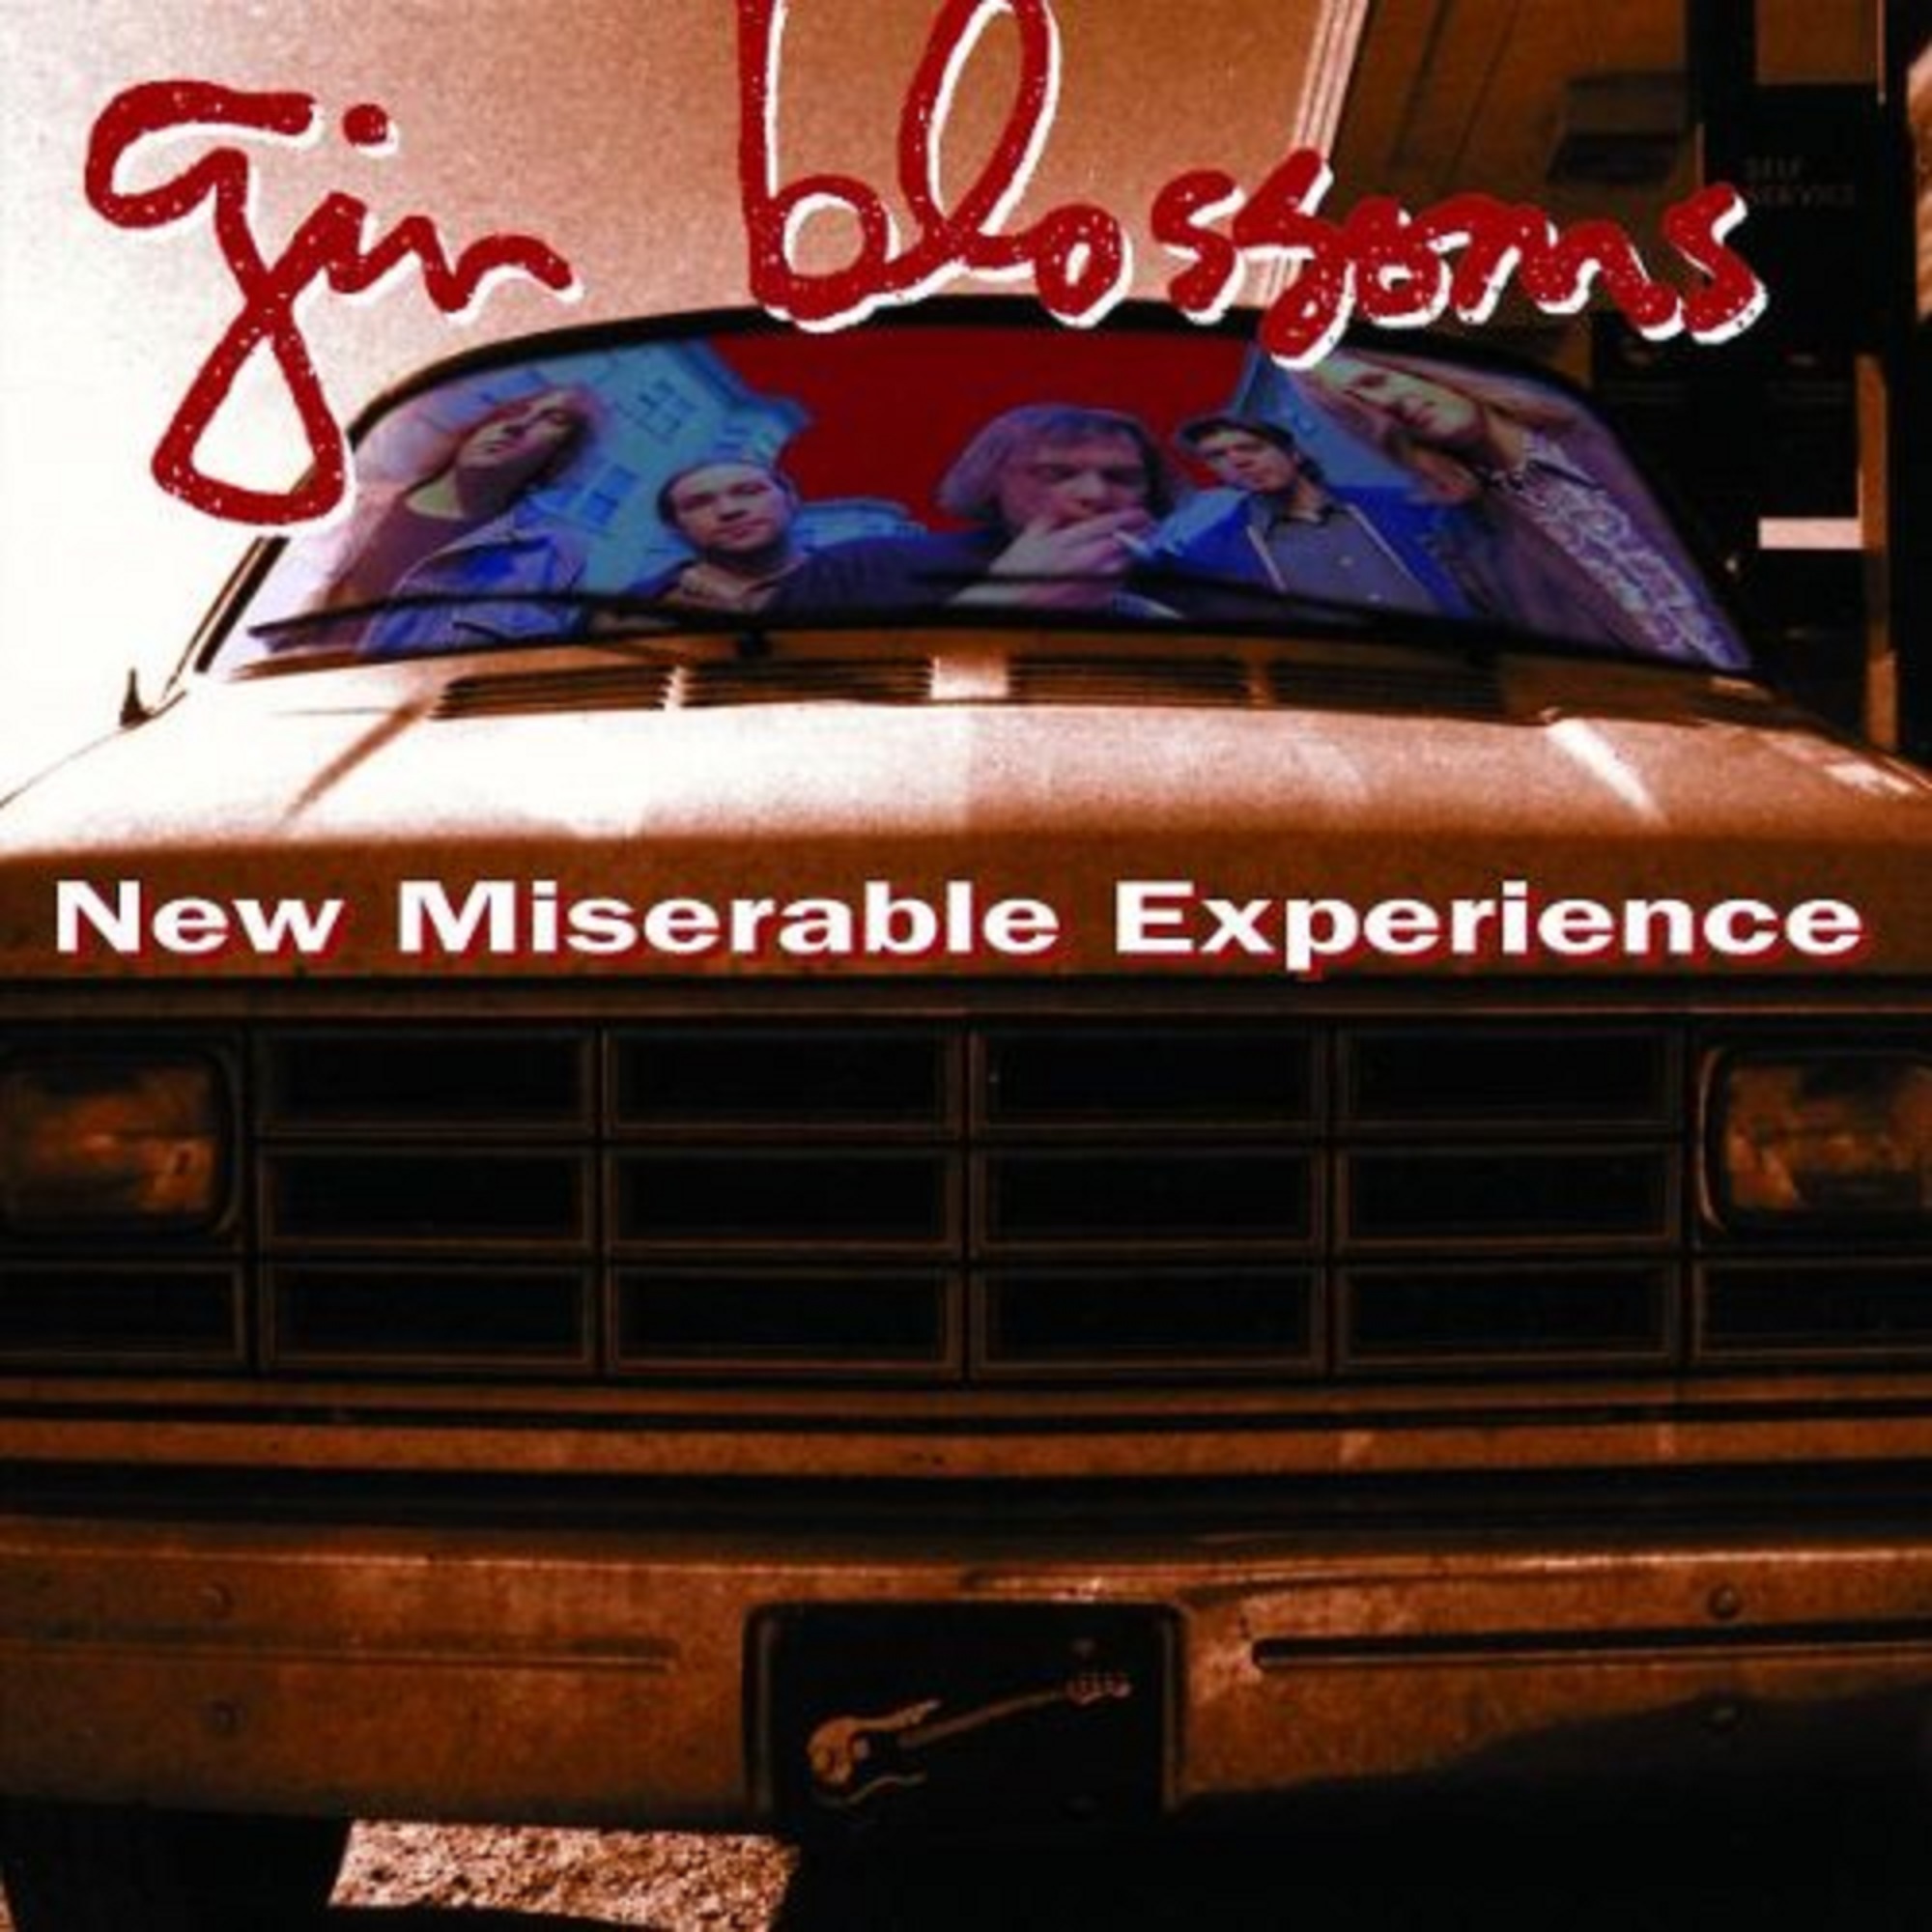 Gin Blossoms Celebrate 30 Miserable Years